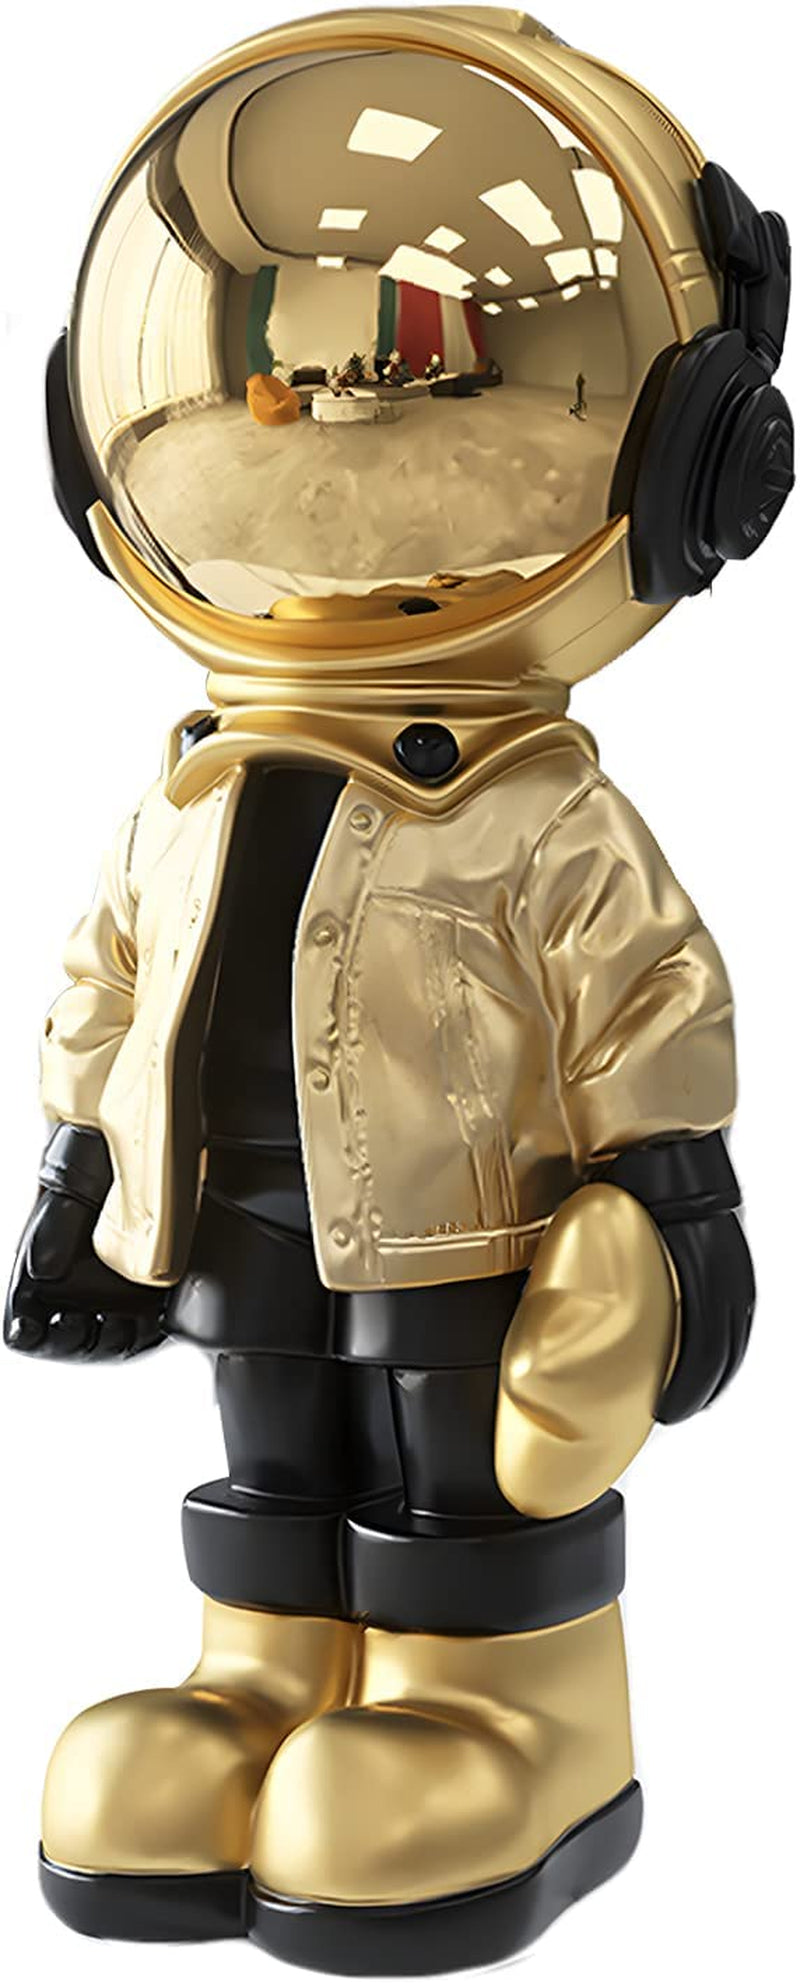 Dosker Astronaut Statues Spaceman Sculpture Polyresin Arts Gifts Orange Figurine Ornament Room Decor for Men,Home and Crafts Desktop Accessories Tabletop Decoration, Living Room, Office, Bookshelf  ZY2417 Gold  